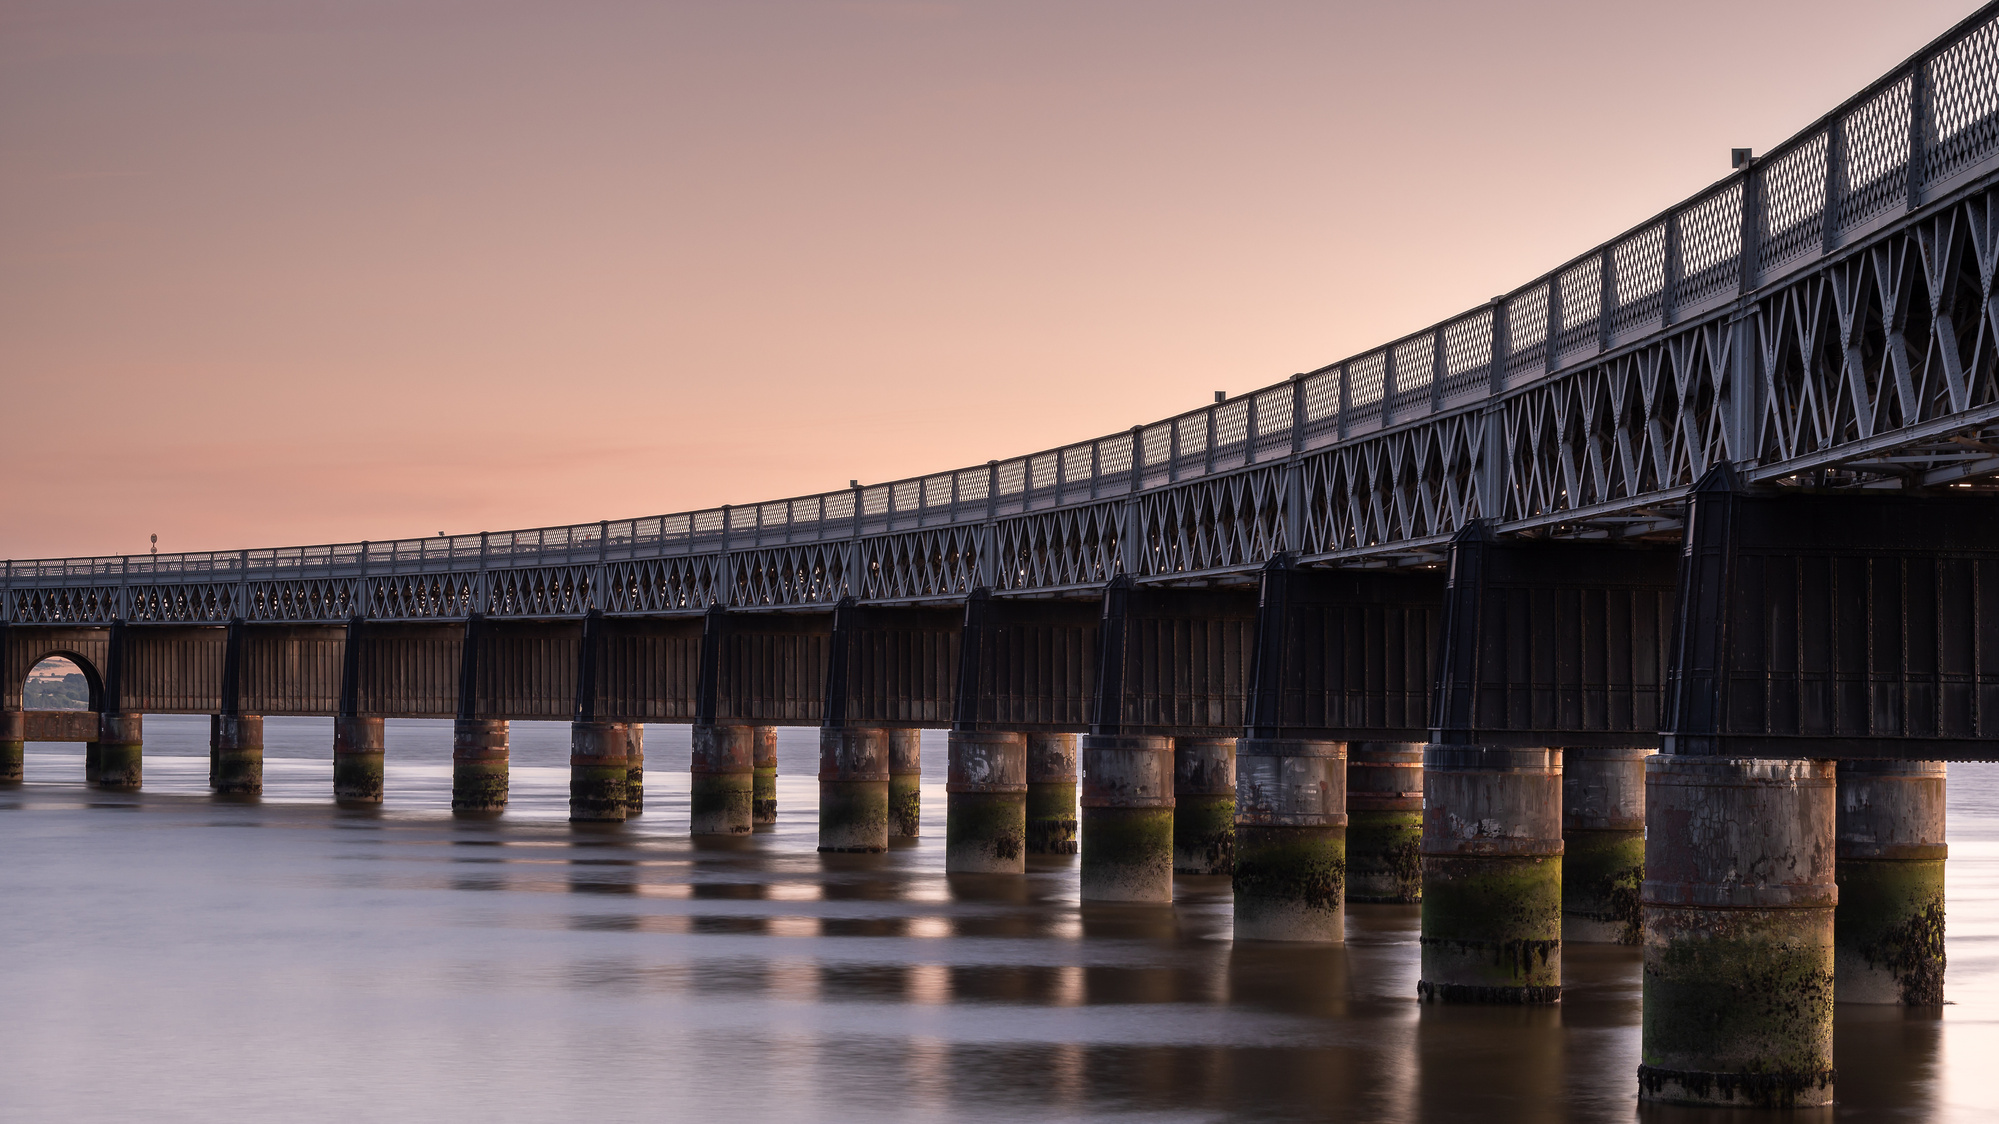 Late evening light hits the Tay Rail Bridge, Dundee, Scotland. A photograph by Tim Pearson.